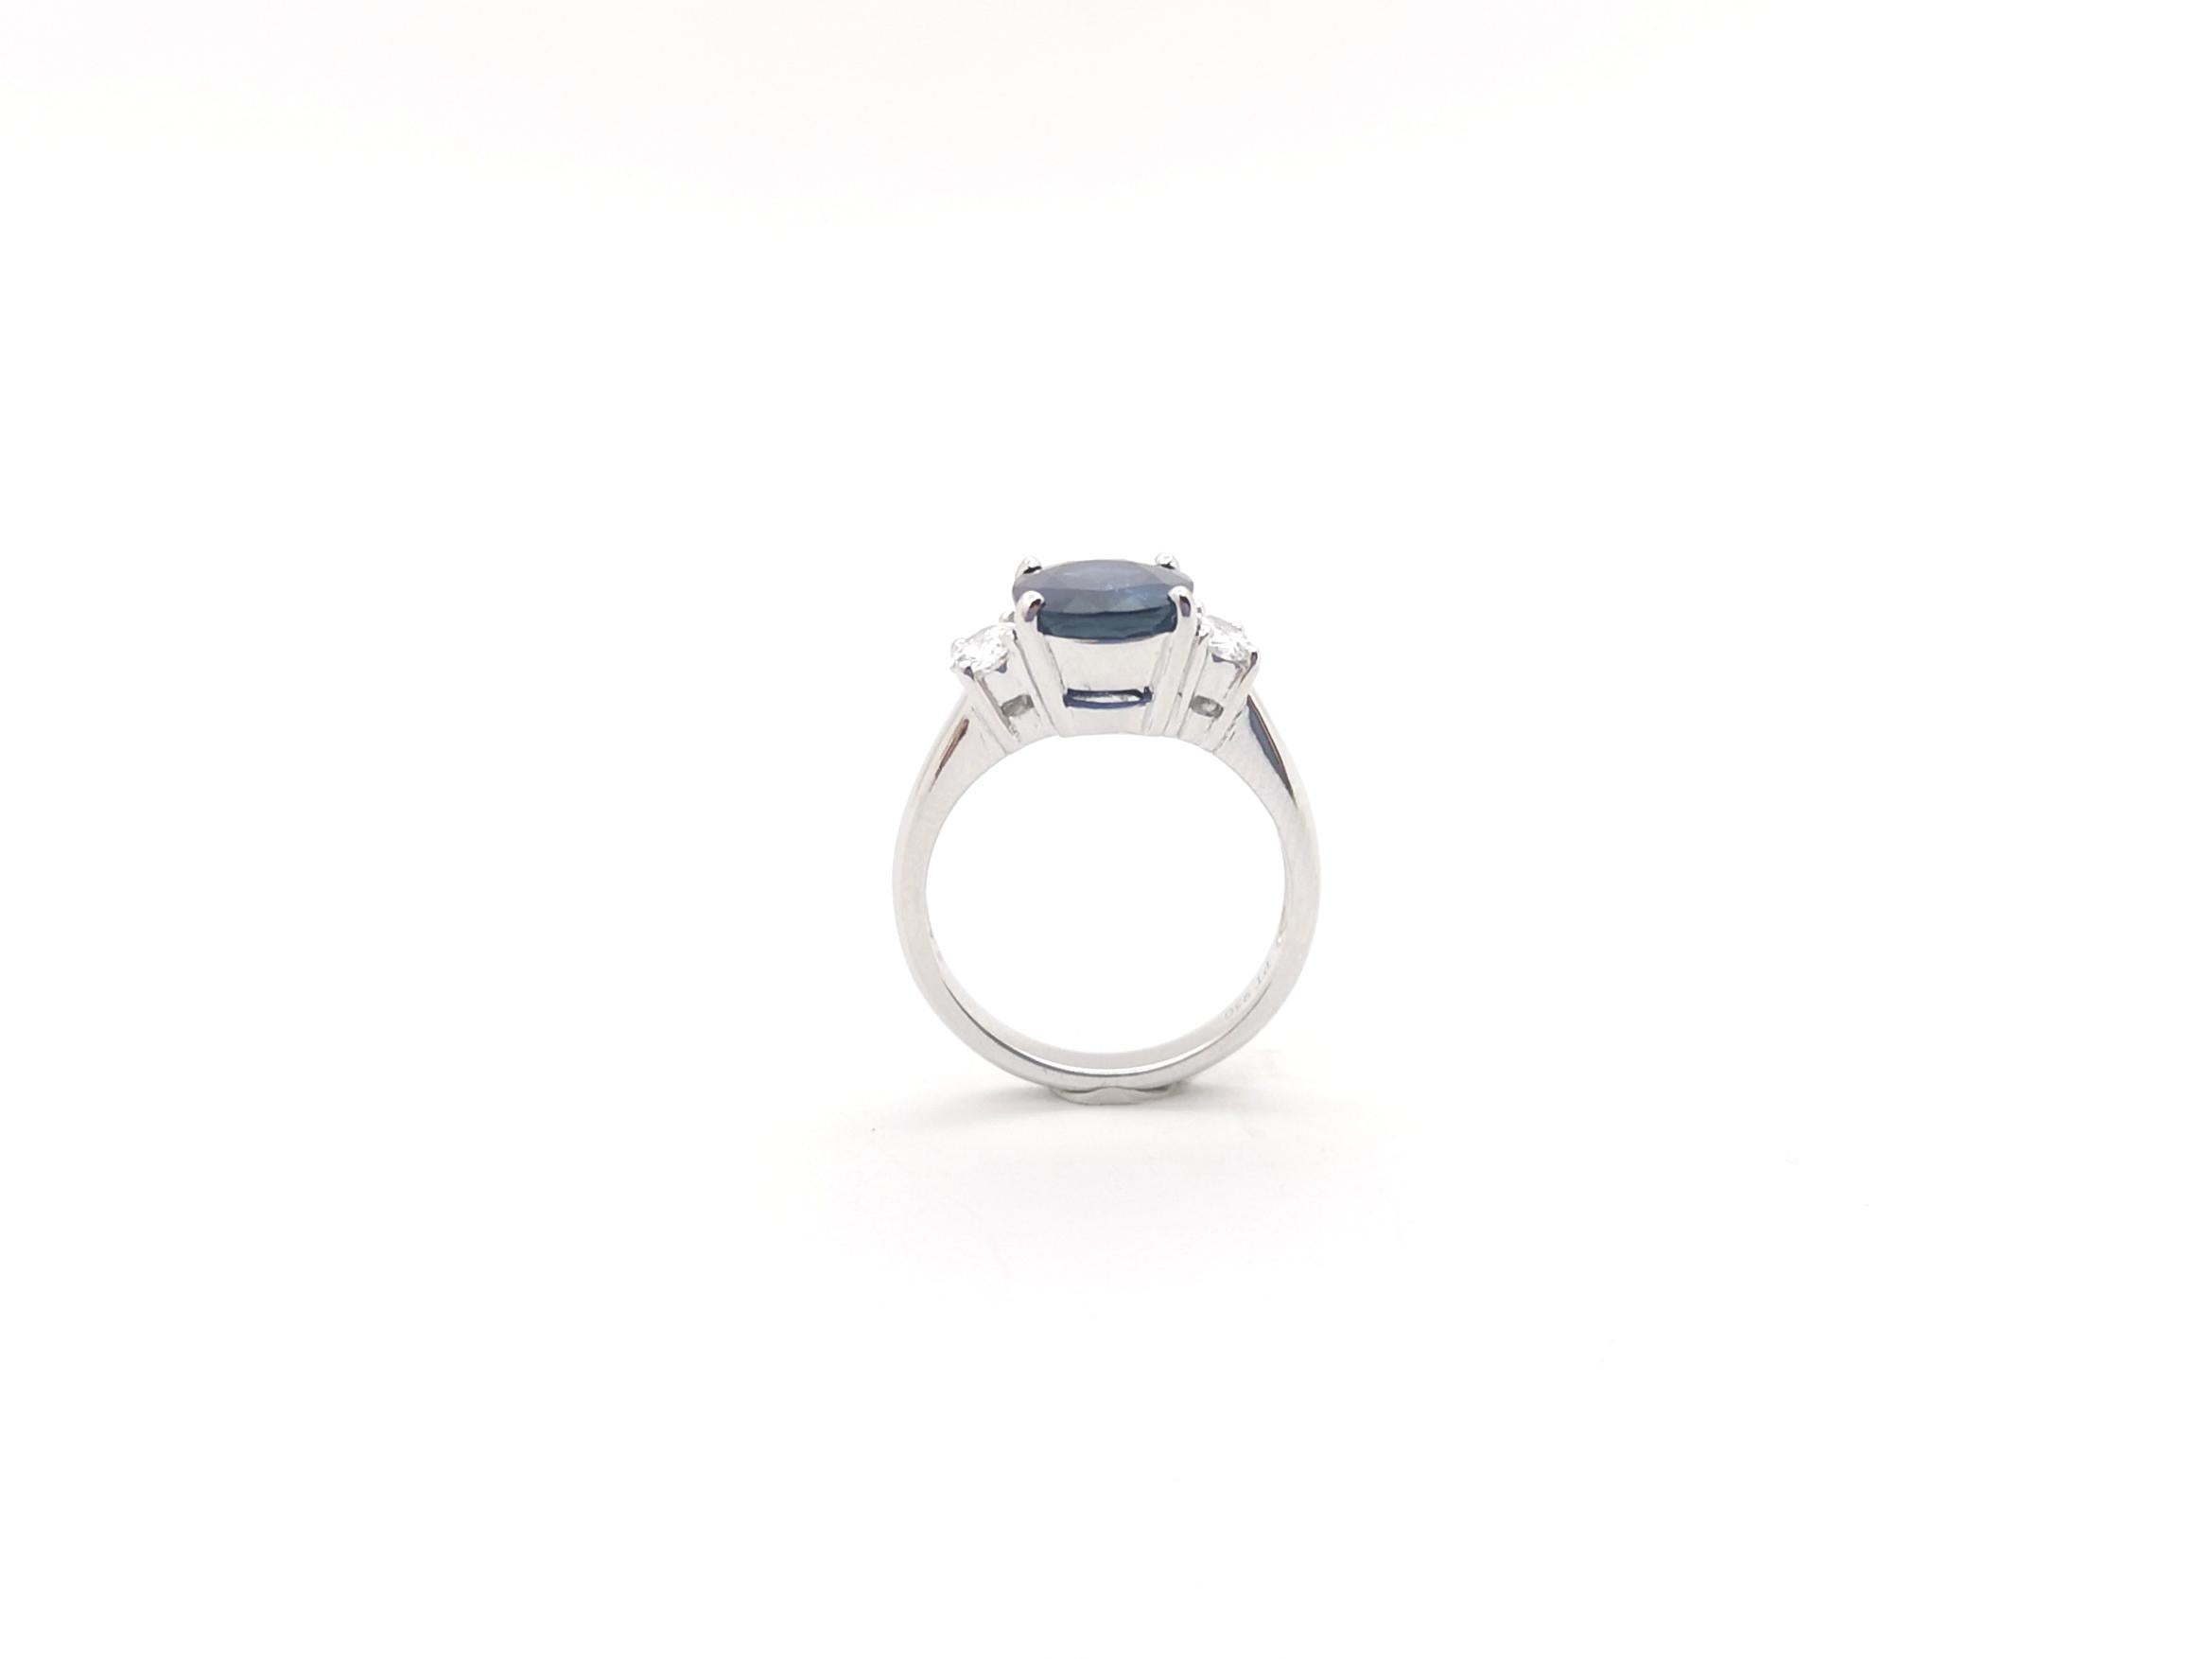 GIA Certified 3.89 cts Blue Sapphire with Diamond Ring set in Platinum 950  For Sale 6